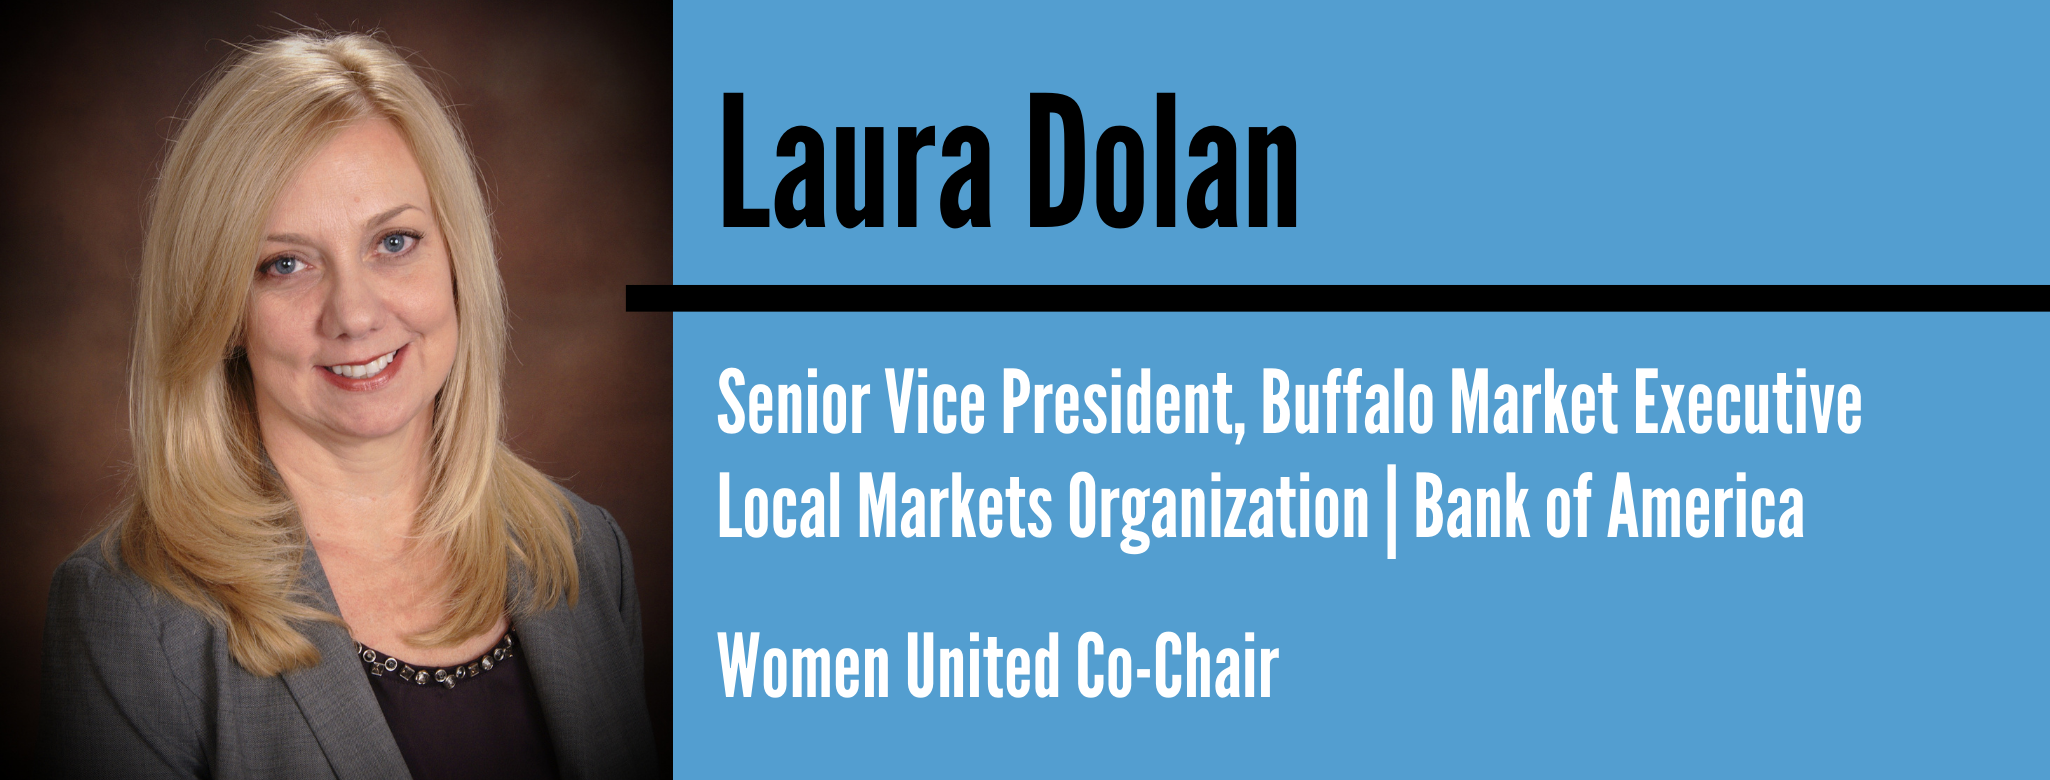 Get to Know Laura Dolan, Women United Co-Chair Image